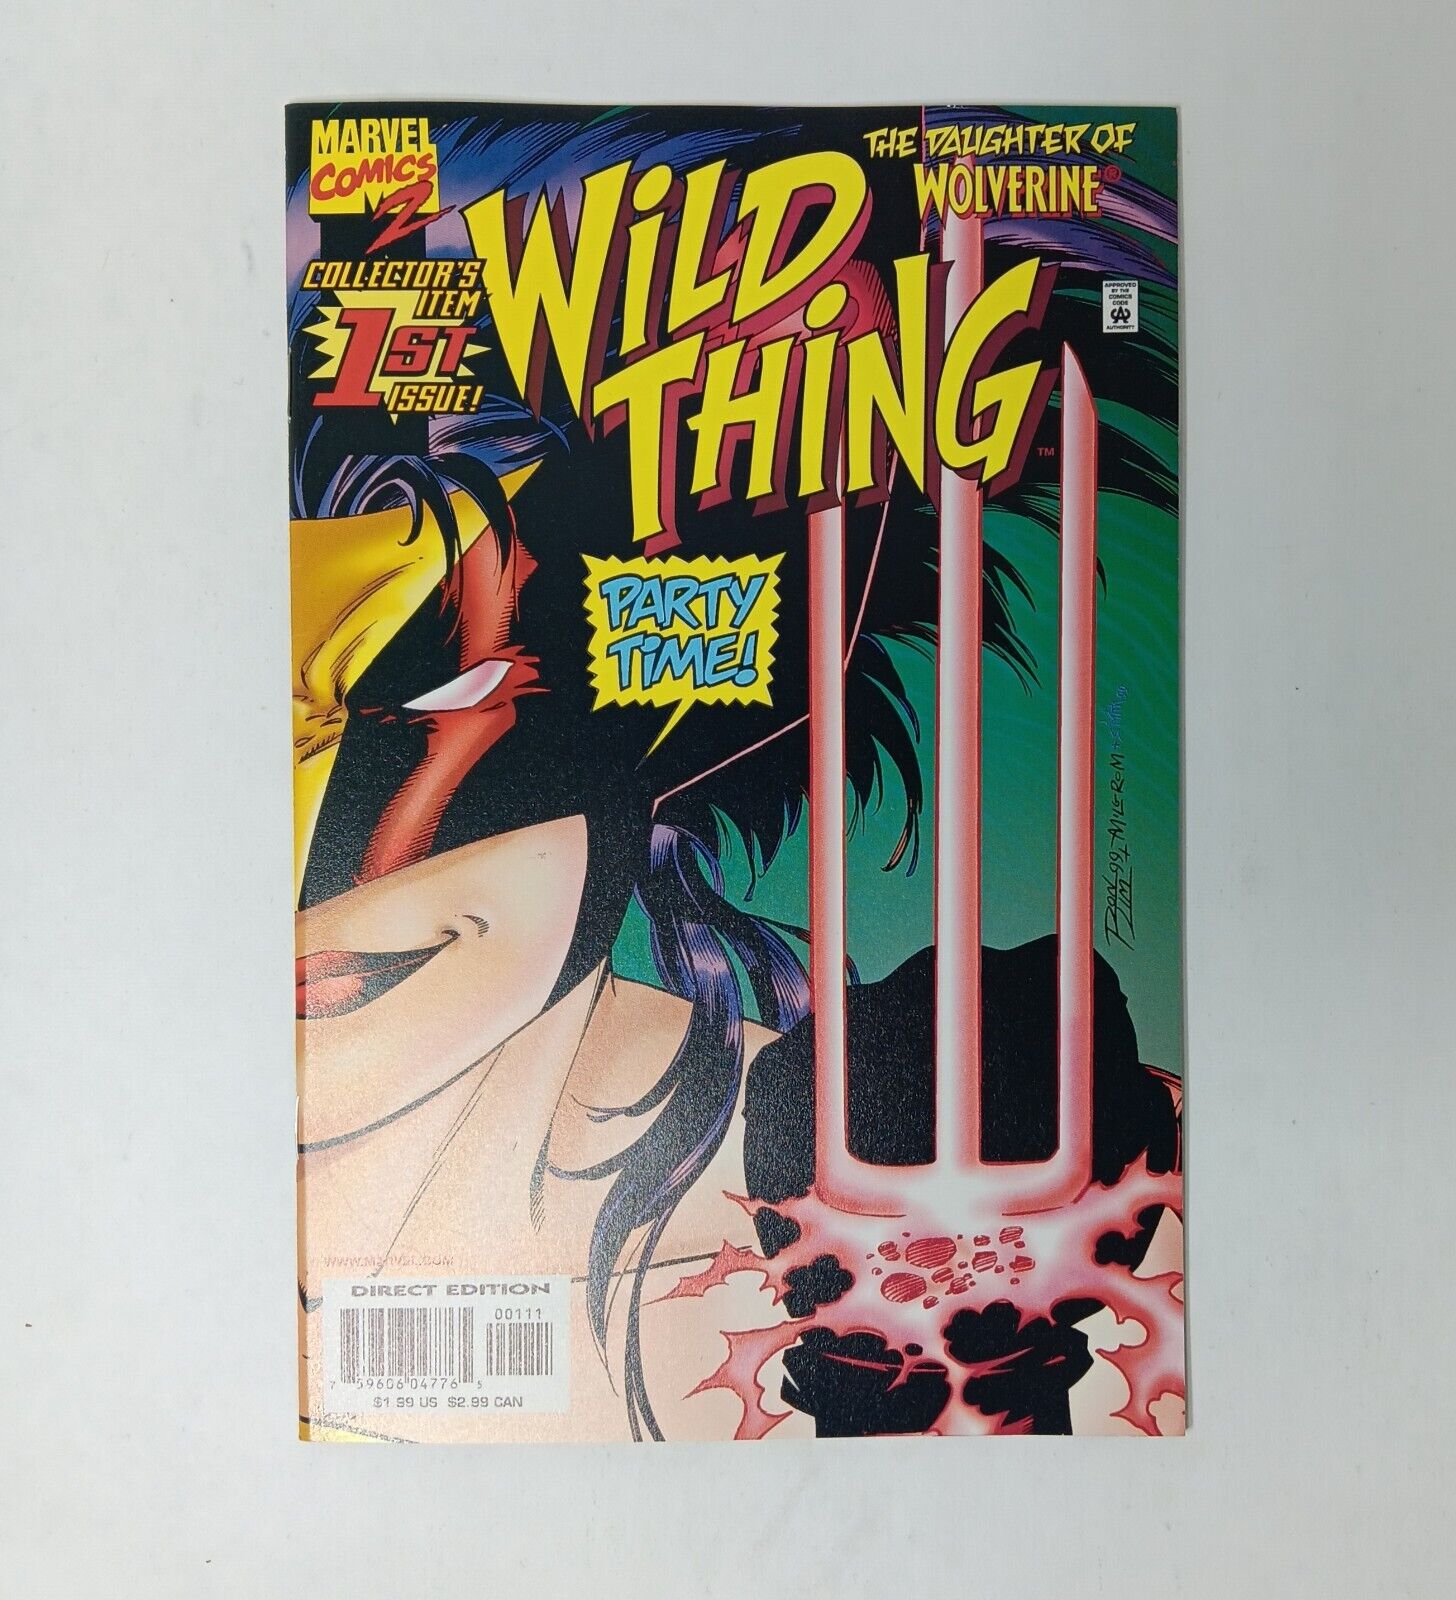 Wild Thing #1  MARVEL COMICS, Larry Hama, Collector's Issue, NM+